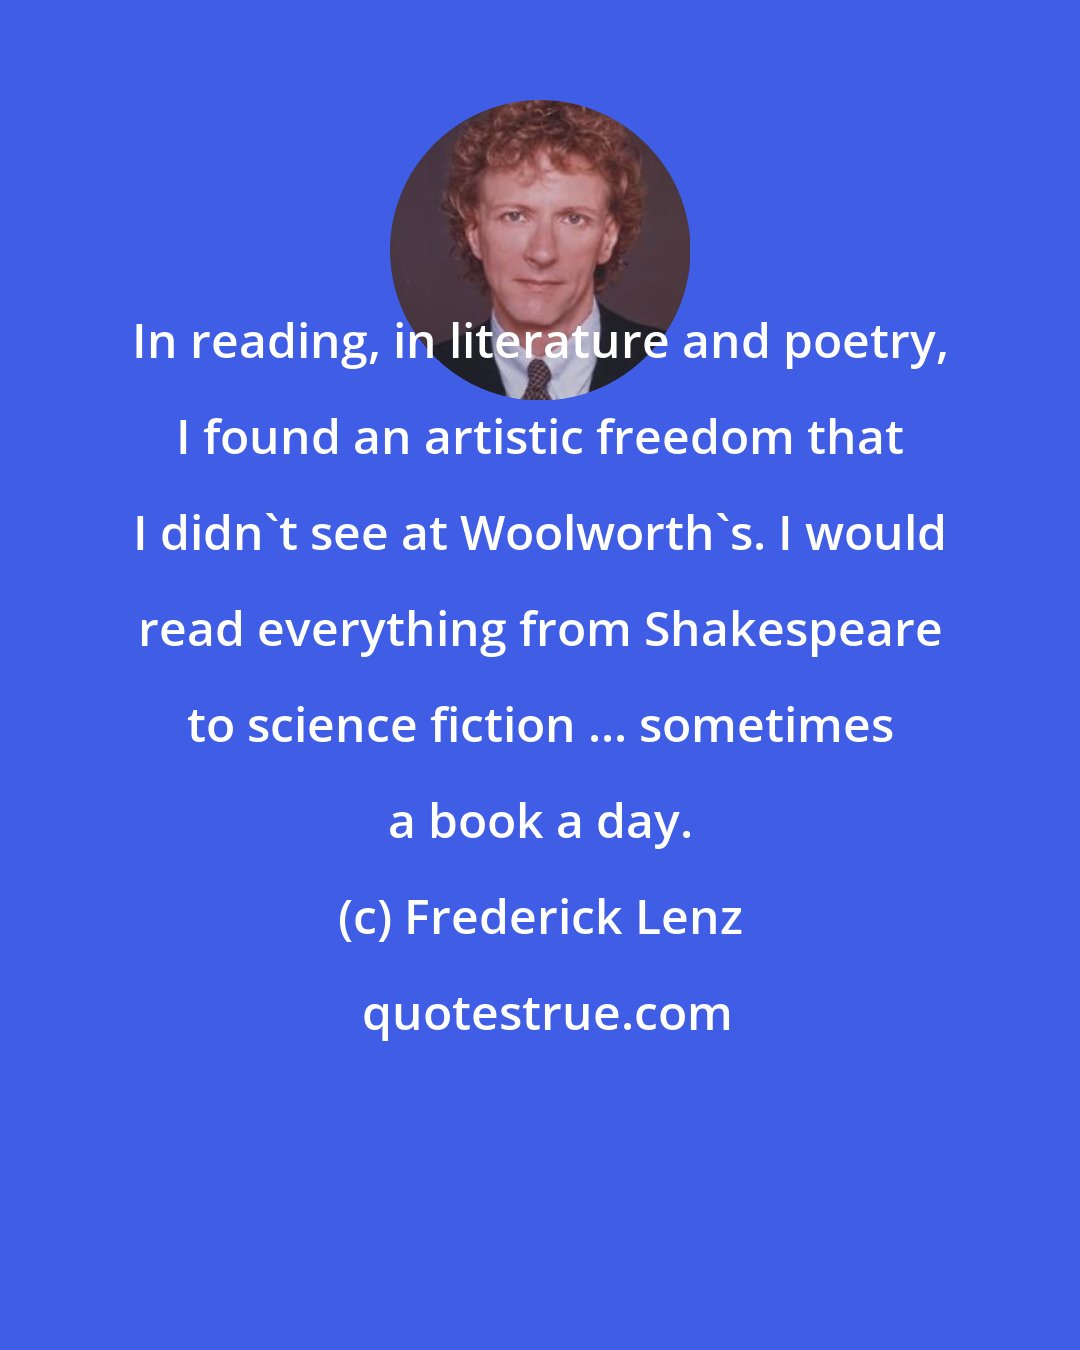 Frederick Lenz: In reading, in literature and poetry, I found an artistic freedom that I didn't see at Woolworth's. I would read everything from Shakespeare to science fiction ... sometimes a book a day.